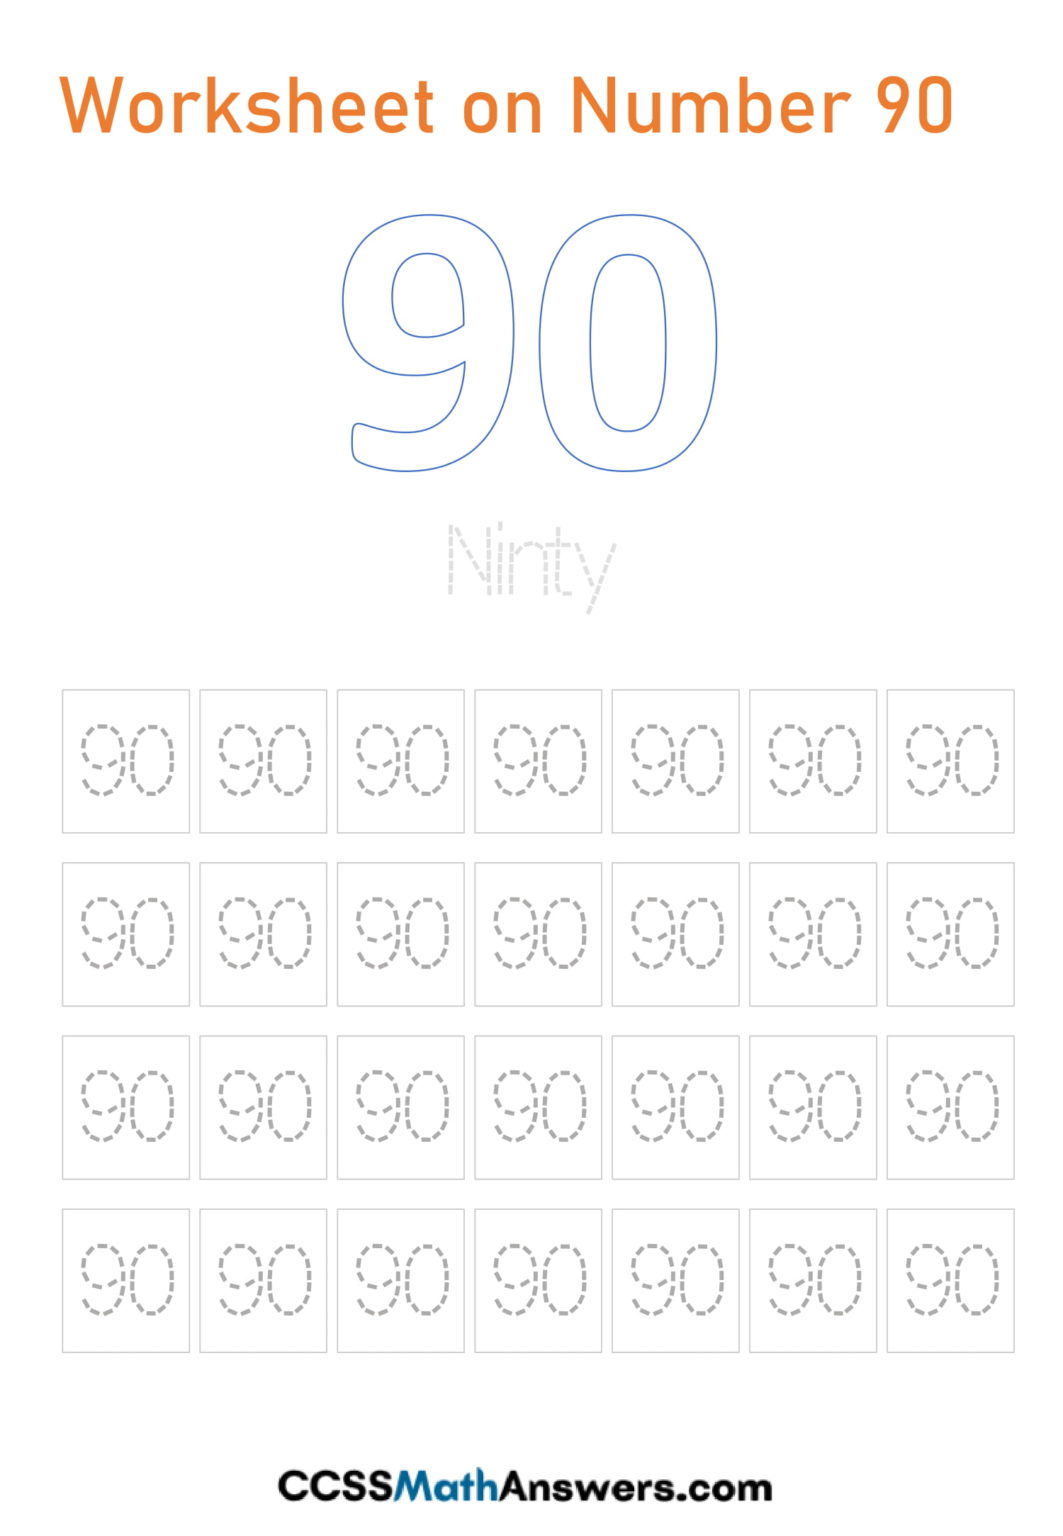 worksheet-on-number-90-printable-number-90-writing-tracing-counting-activities-for